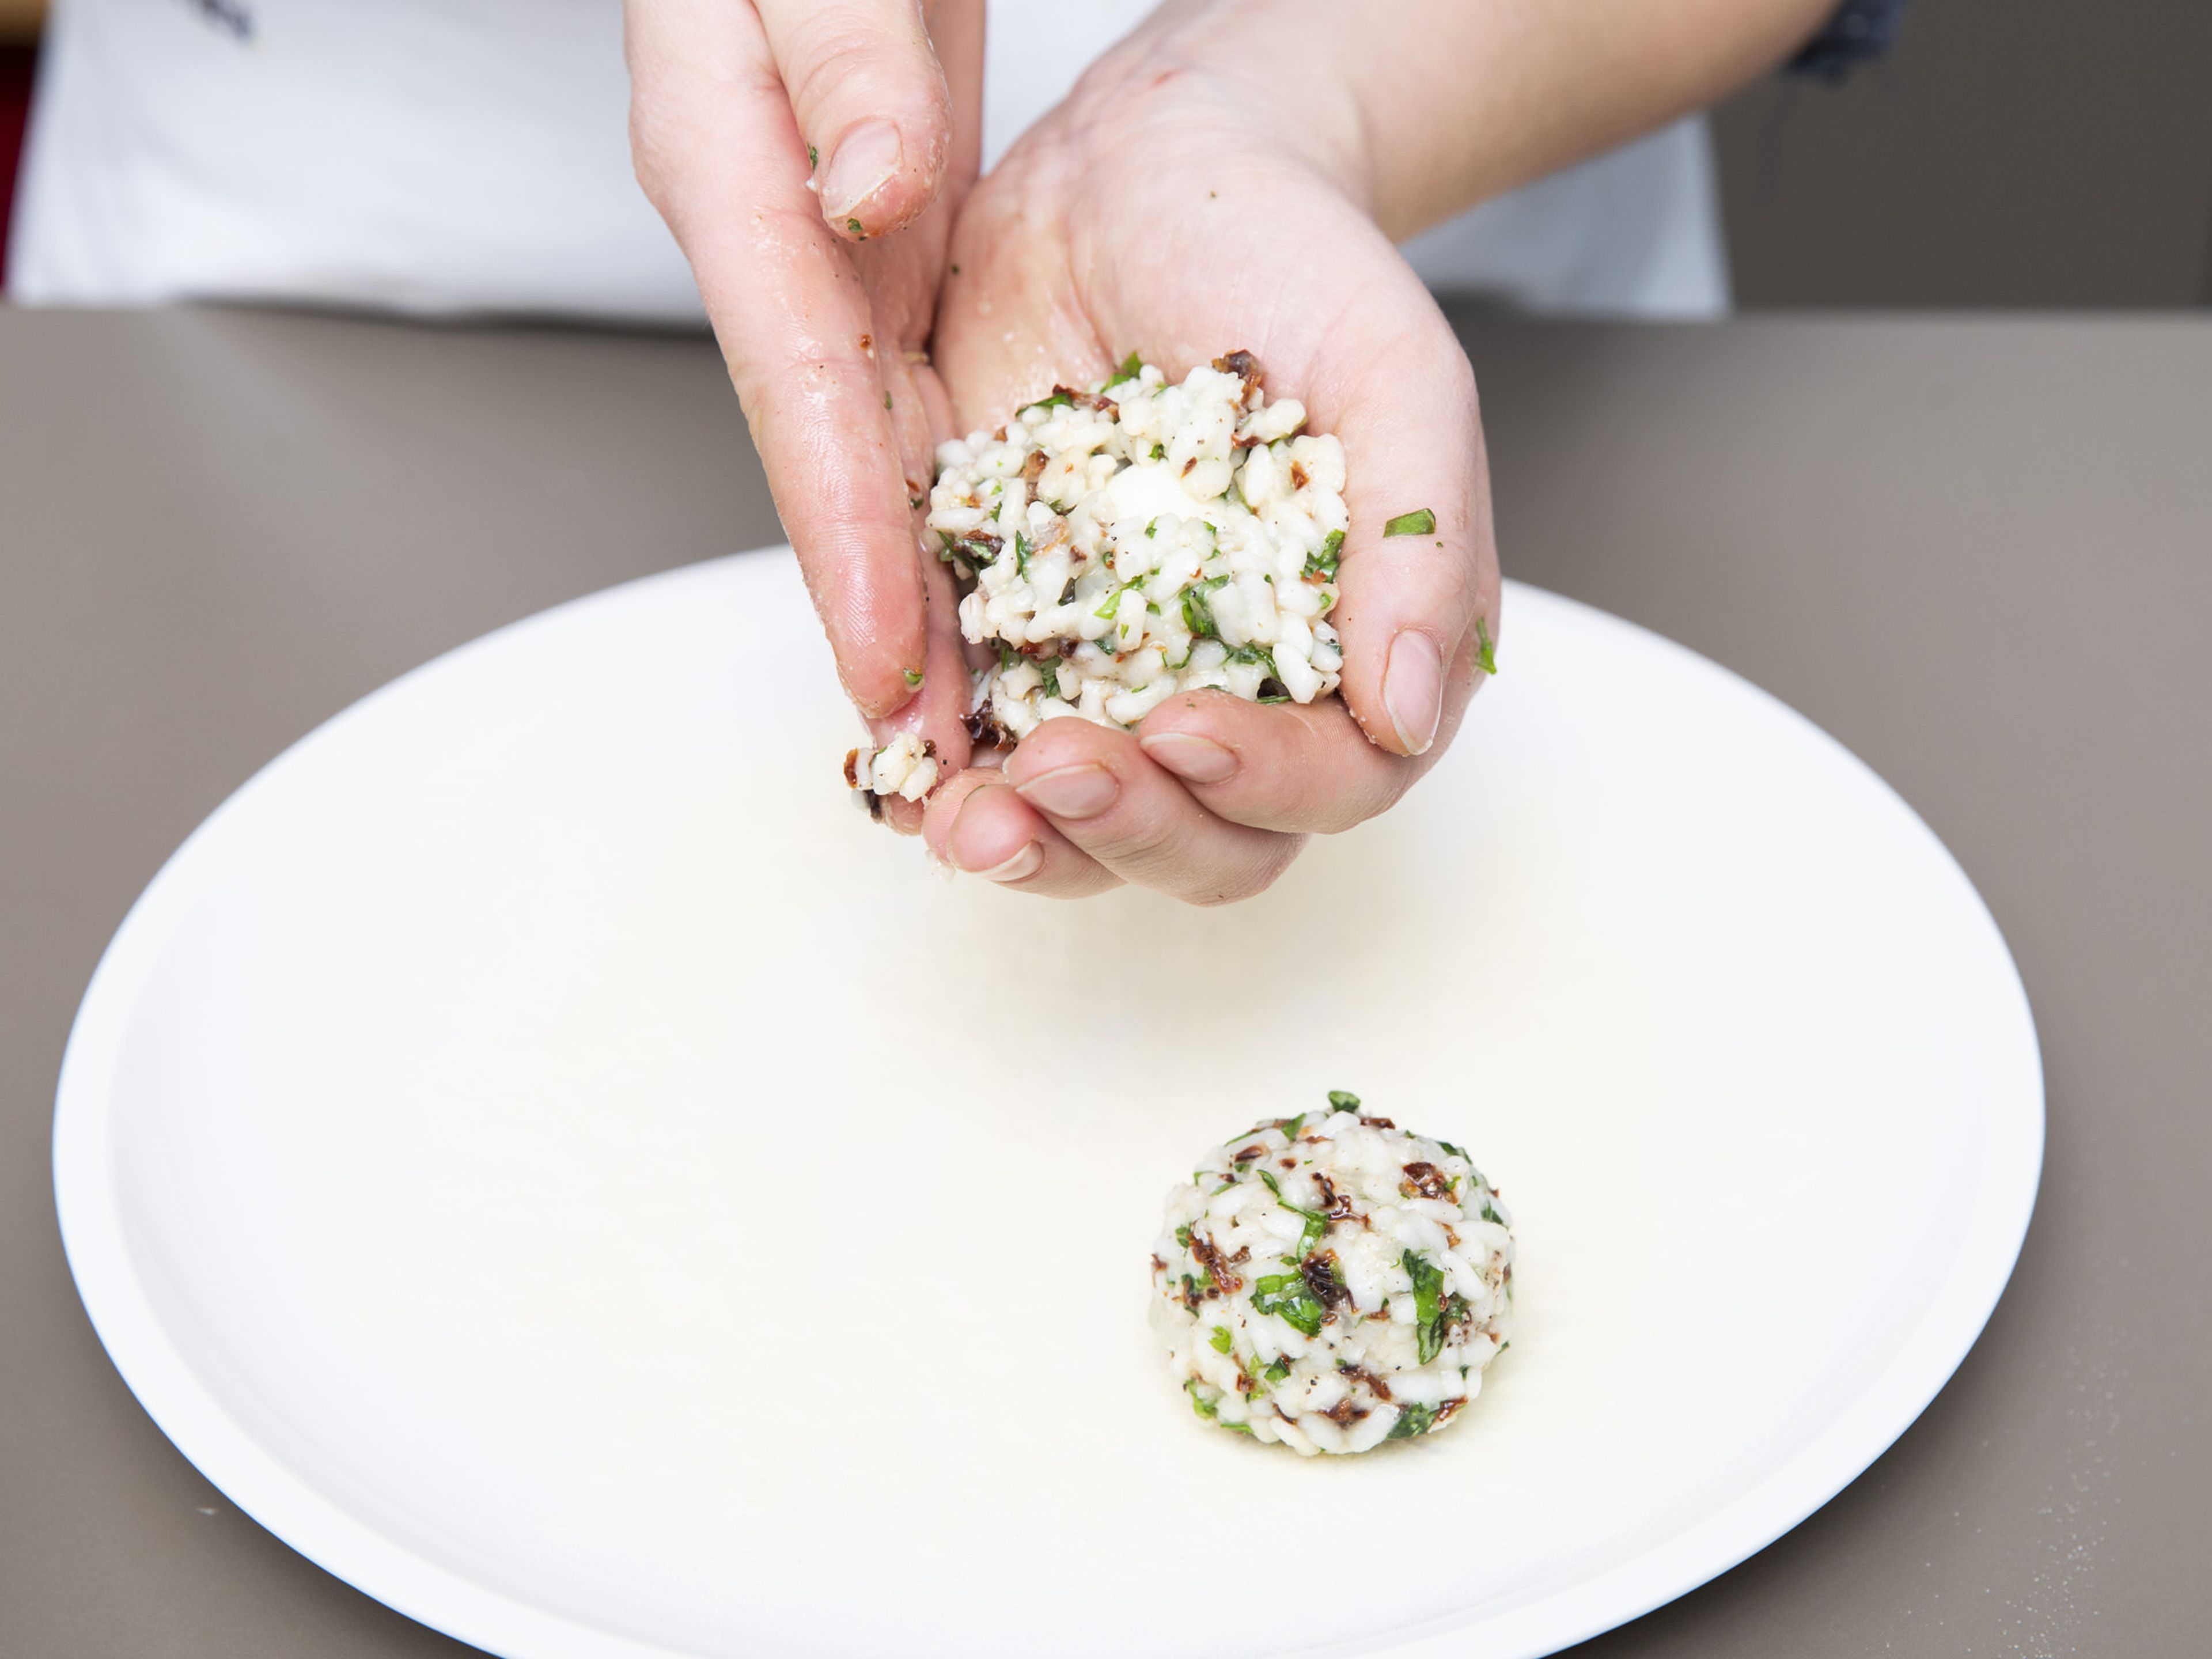 Cut the mozzarella into small cubes. For easier portioning, use a knife to cut squares into the rice, approx. 7cm x 7cm. Place one mozzarella piece on each square. With damp hands, form the risotto into balls around each mozzarella piece.